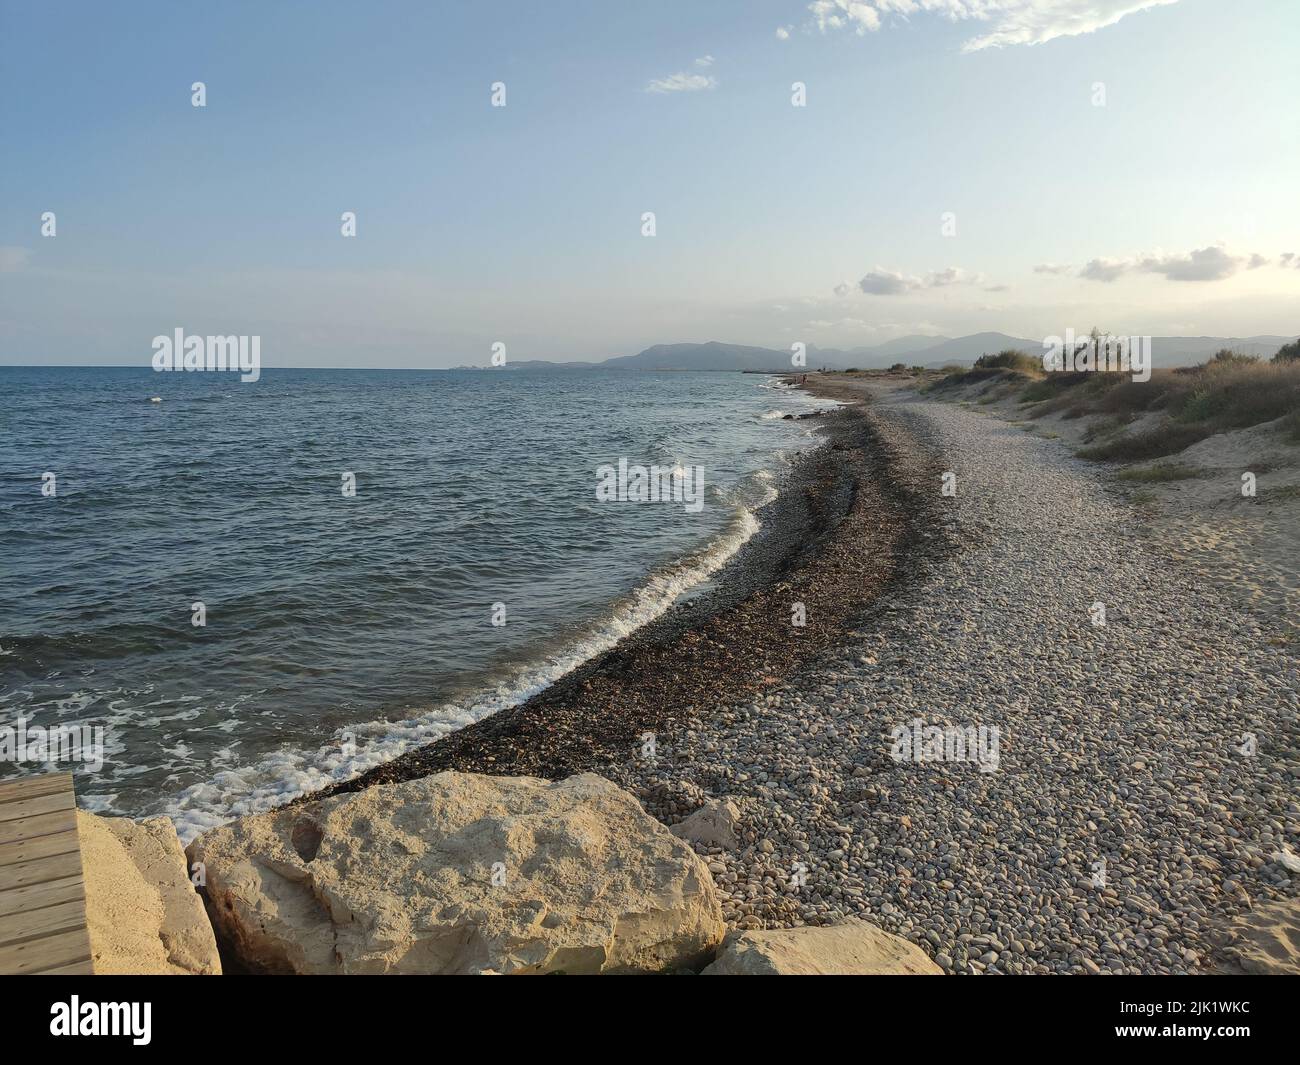 Beach. Rocky beach empty of people. Cozy and calm image next to the Mediterranean Sea and the waves breaking on the shore. In Spain. Europe. Horizonta Stock Photo